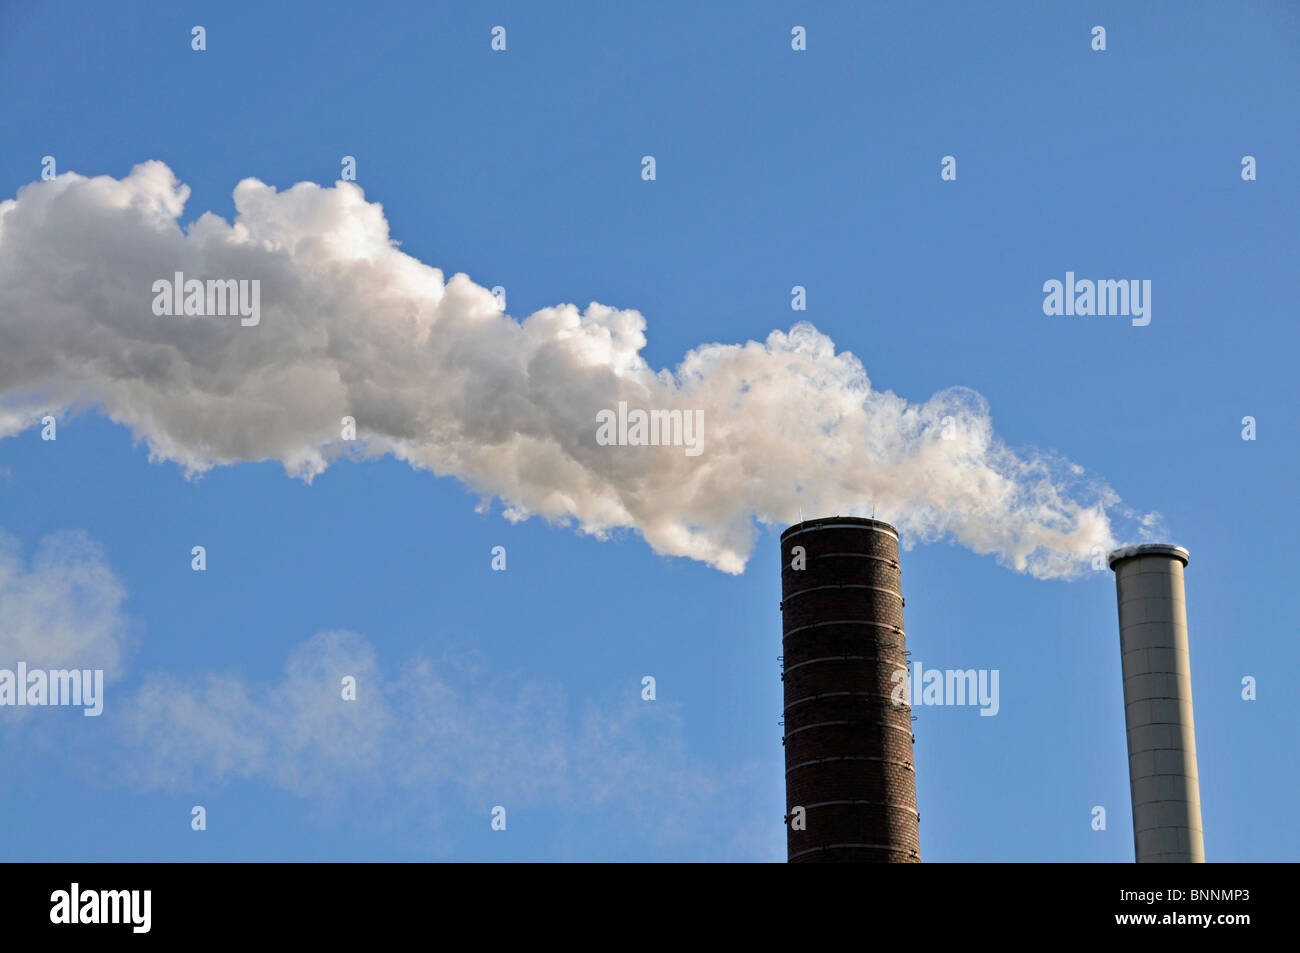 Exhaust air chimneys outside outdoor chemistry chemistry factory chemical industry chemistry work chemical industry Degussa Stock Photo